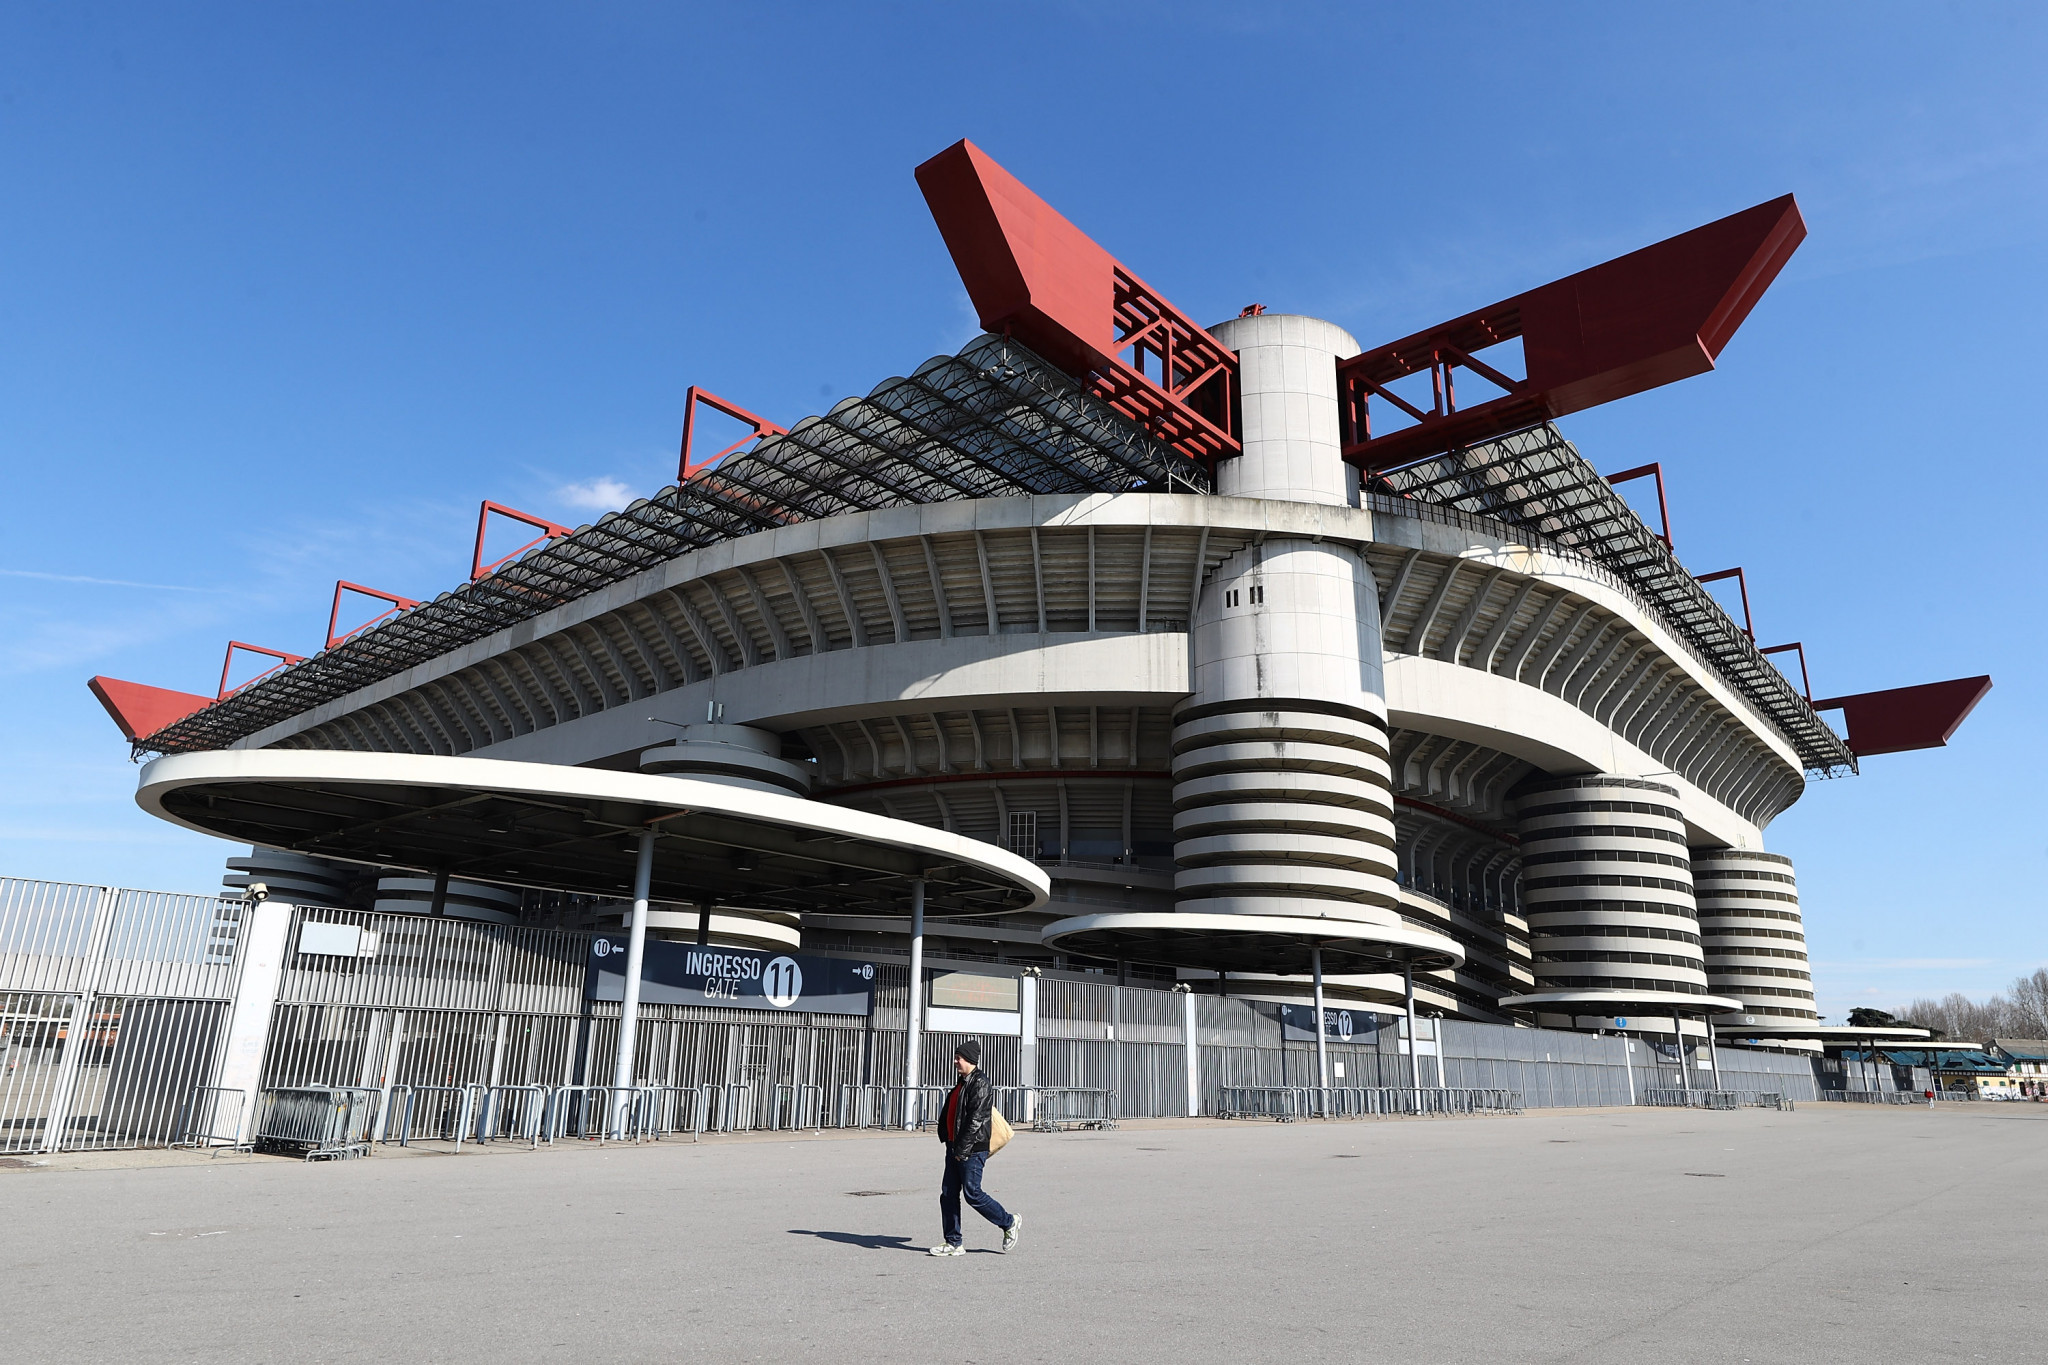 San Siro redevelopment has feasibility addendum and new financial plan submitted